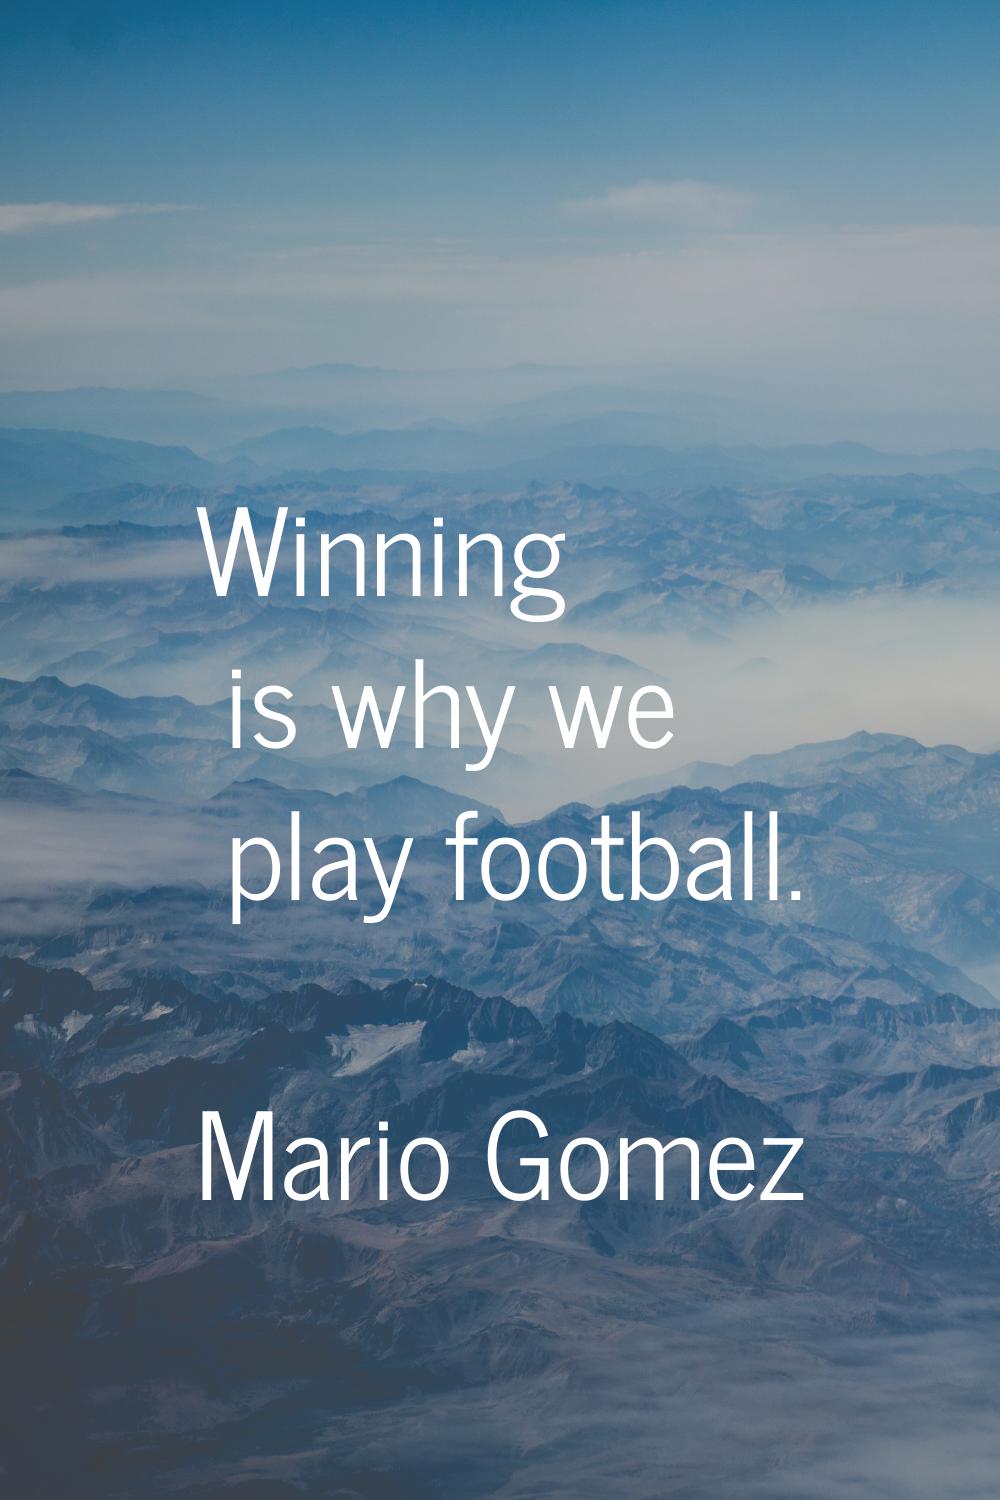 Winning is why we play football.